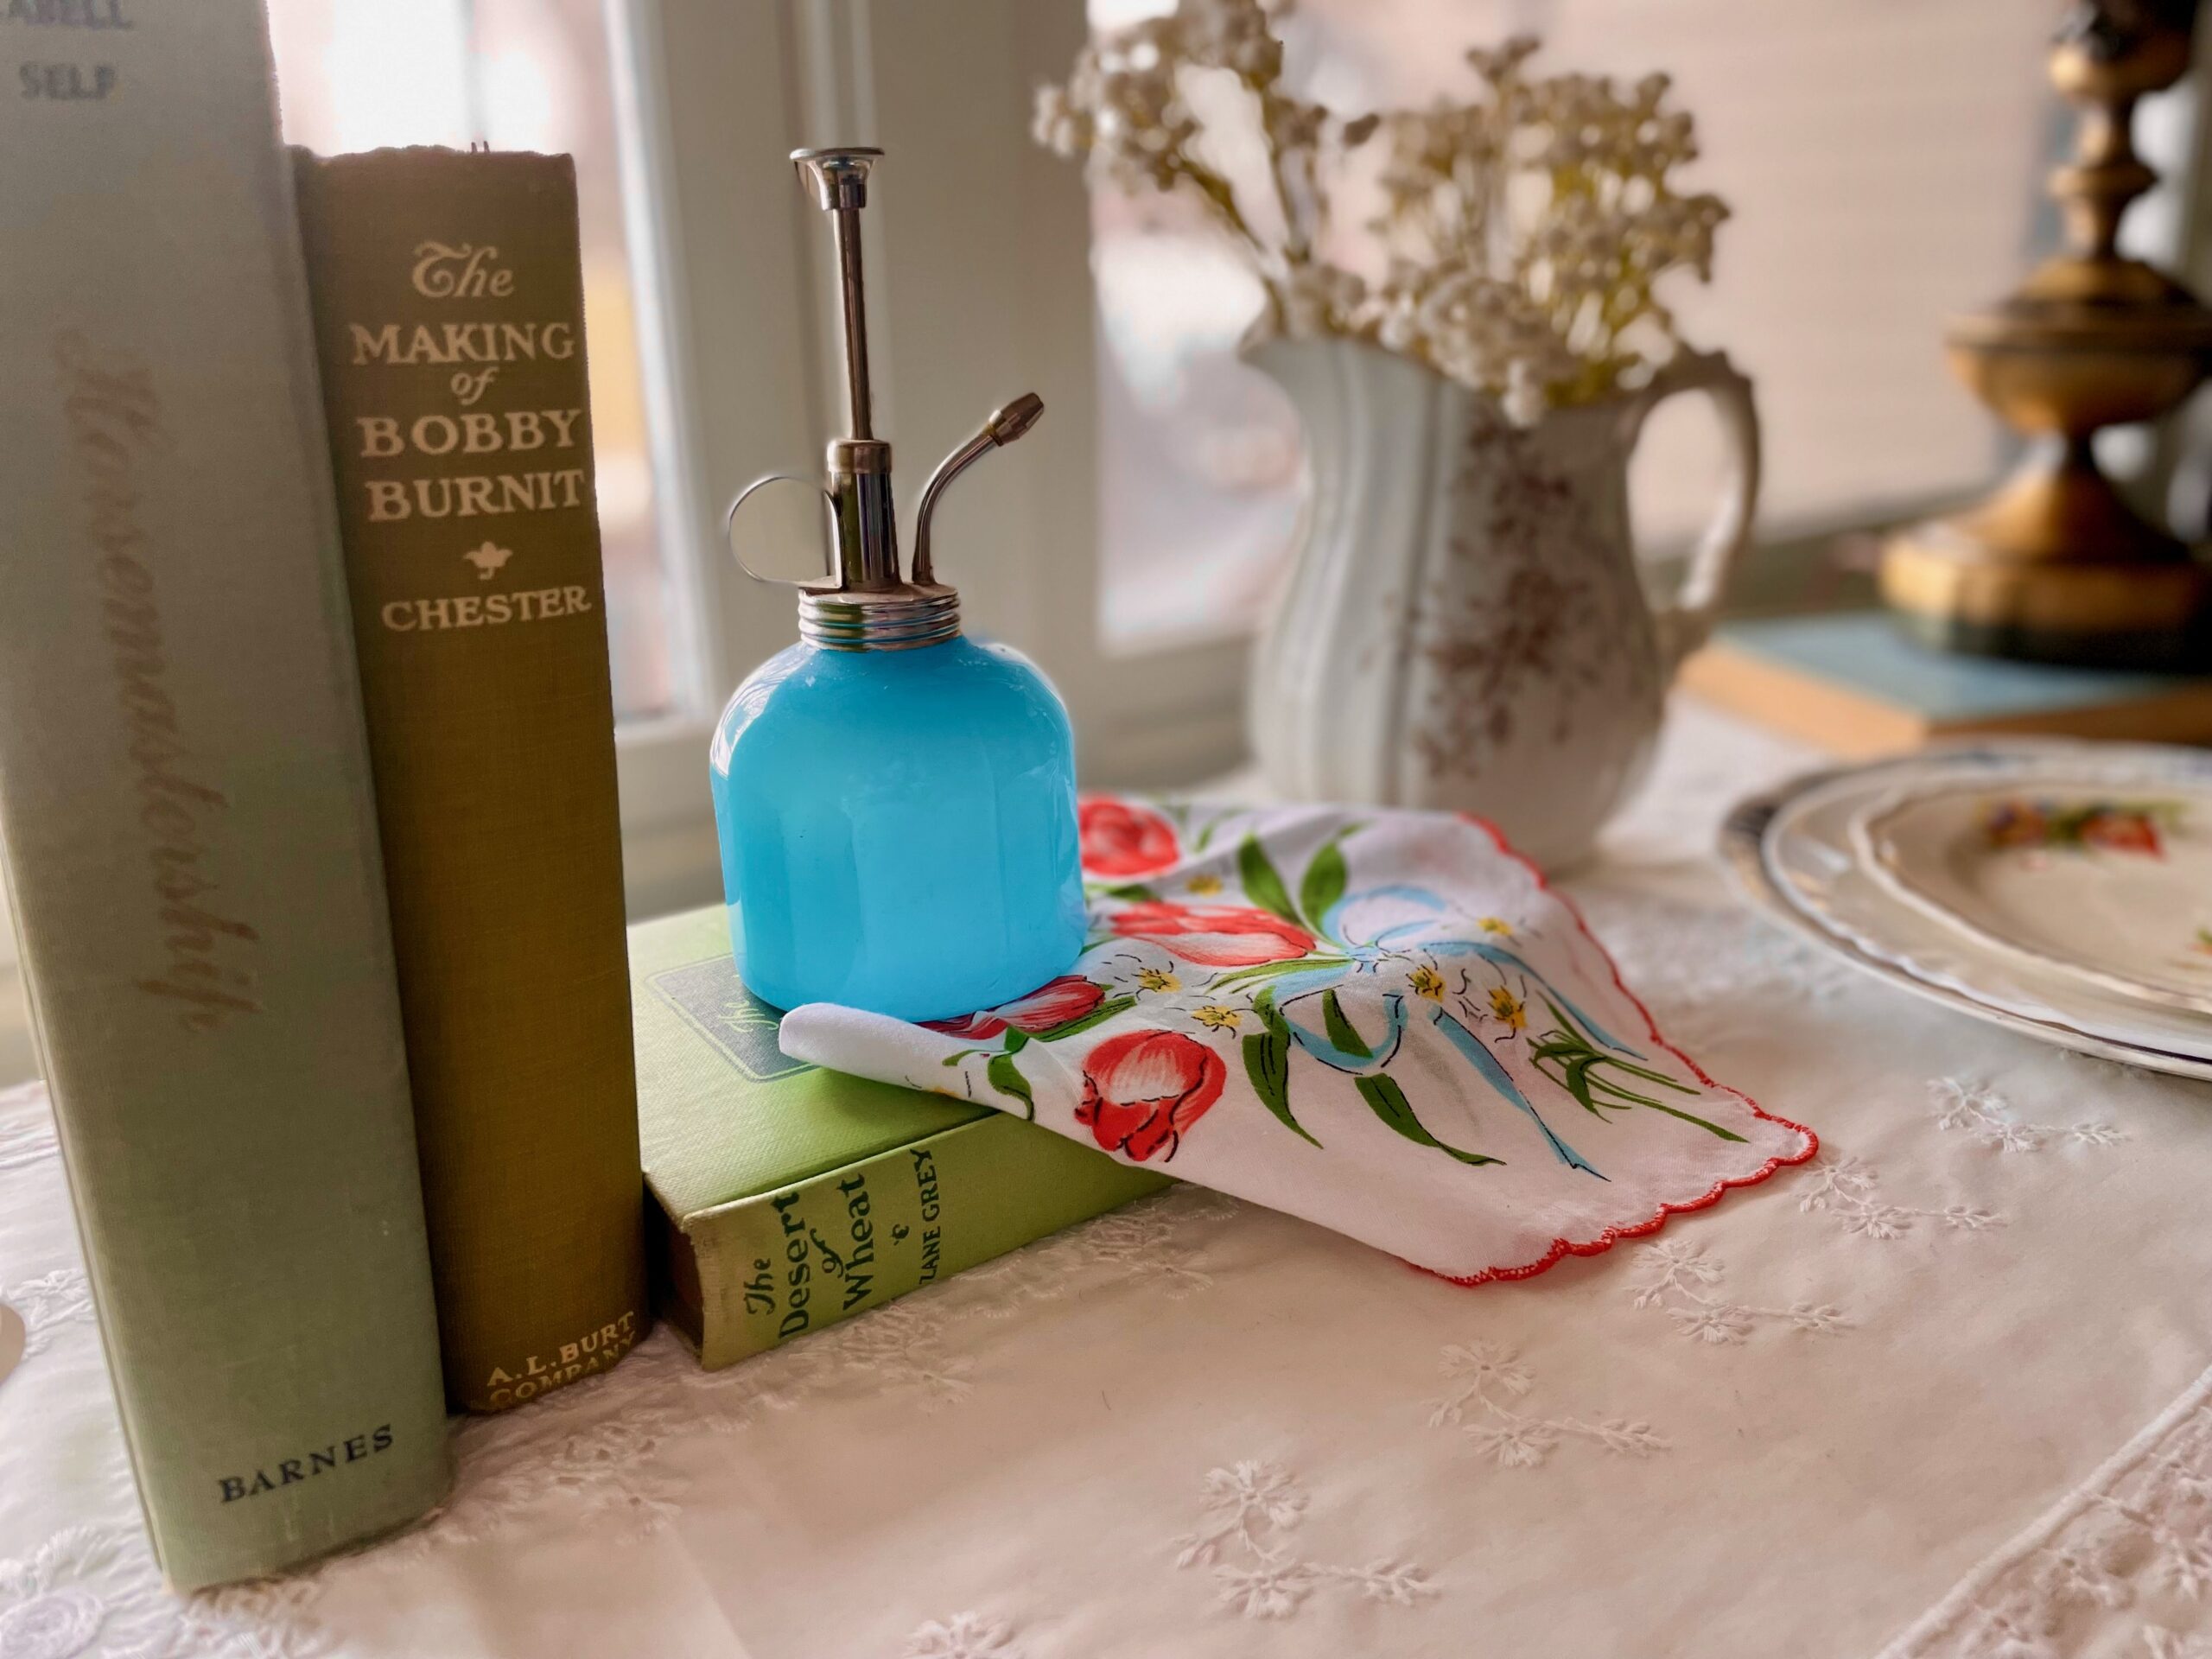 vintage books and decor used in a Spring vignette